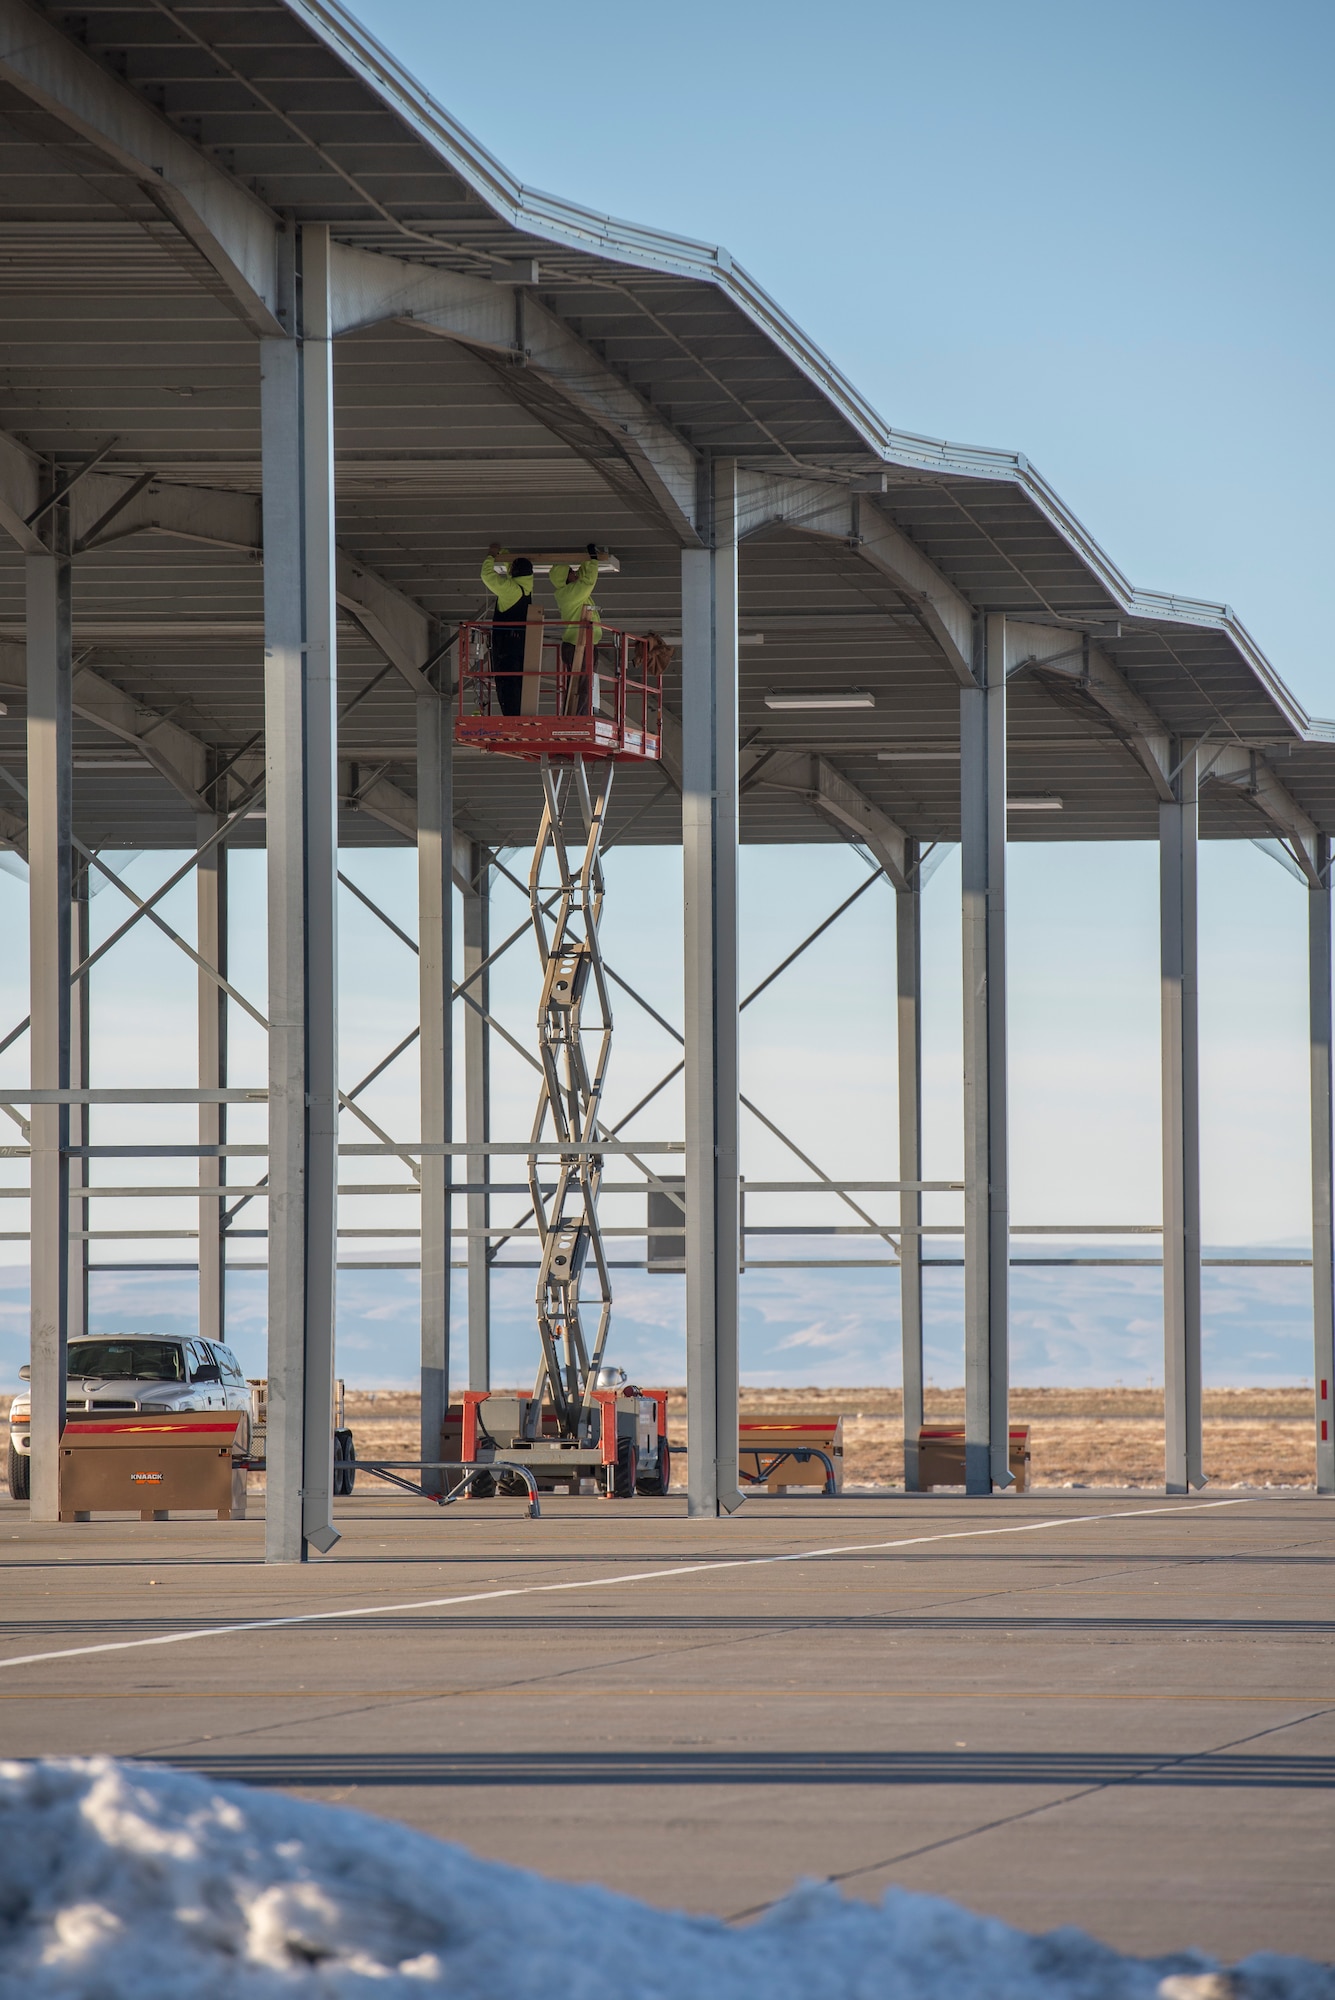 Civilian contractors work on installing lights in the sunshades at Mountain Home Air Force Base, Idaho, Nov. 24, 2014. The completion goal for all the new sunshade lighting is January 2015. (U.S. Air Force photo by Airman 1st Class Jessica Smith/RELEASED)